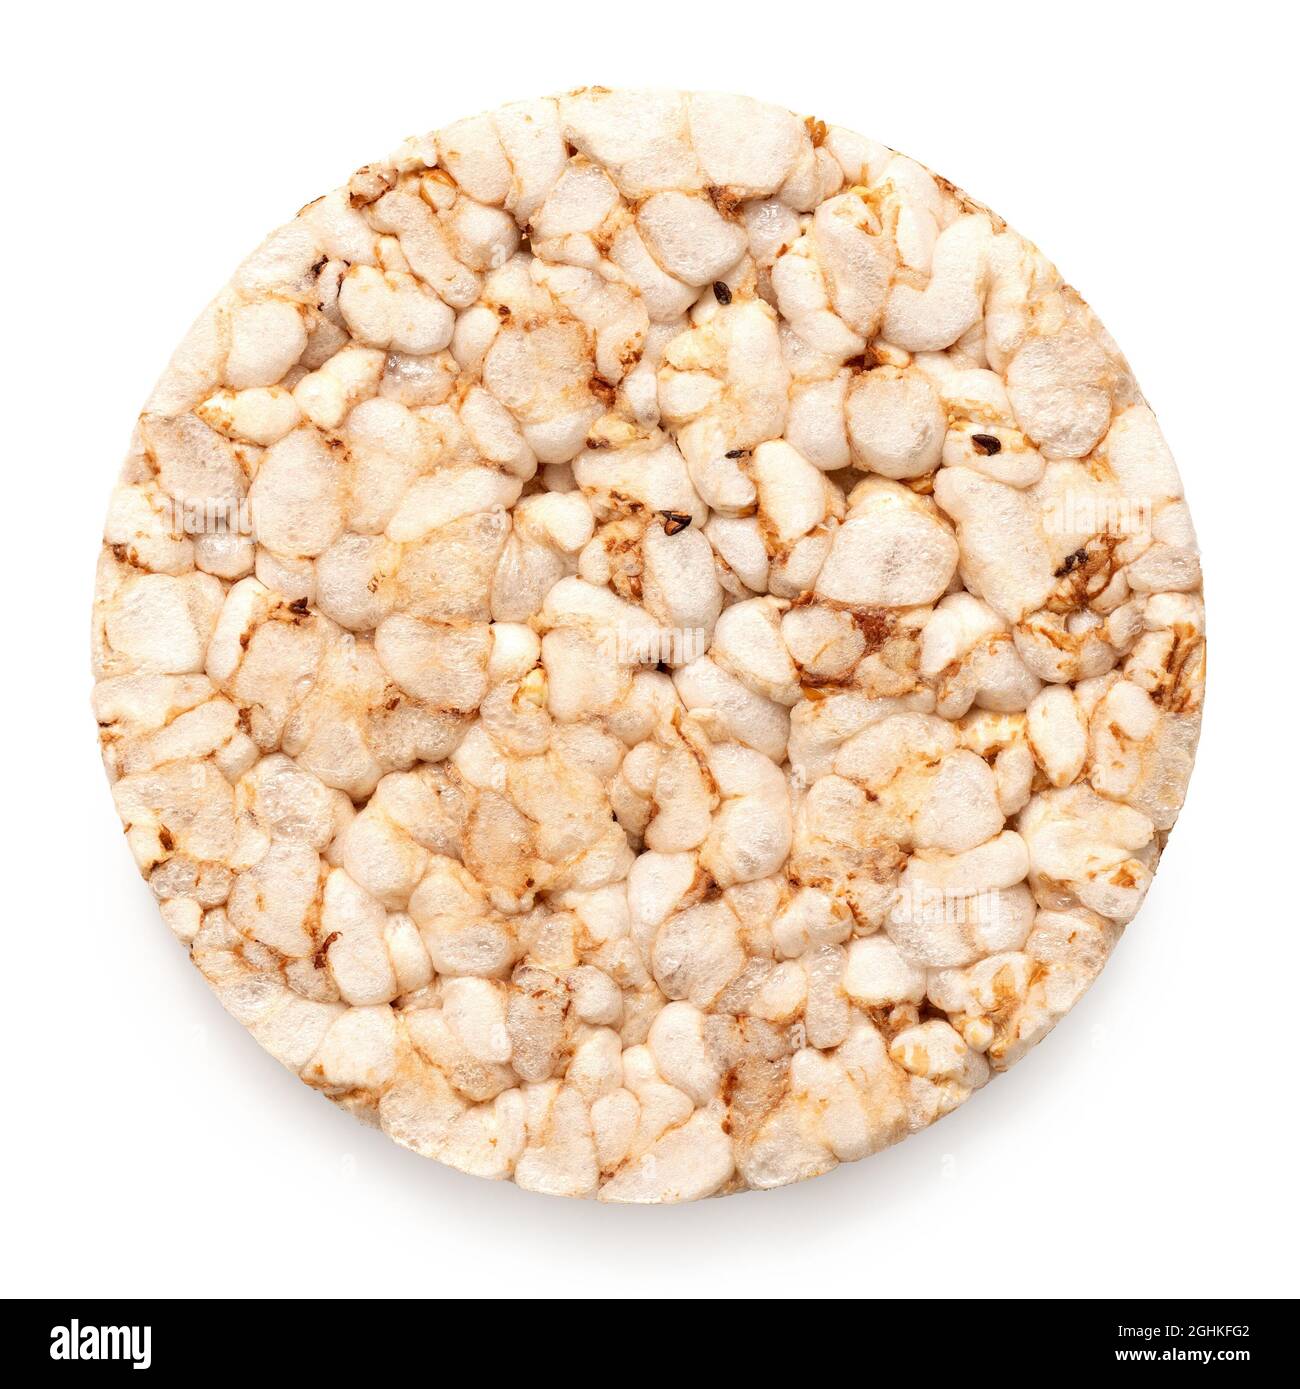 Plain puffed brown rice cake isolated on white. Top view. Stock Photo